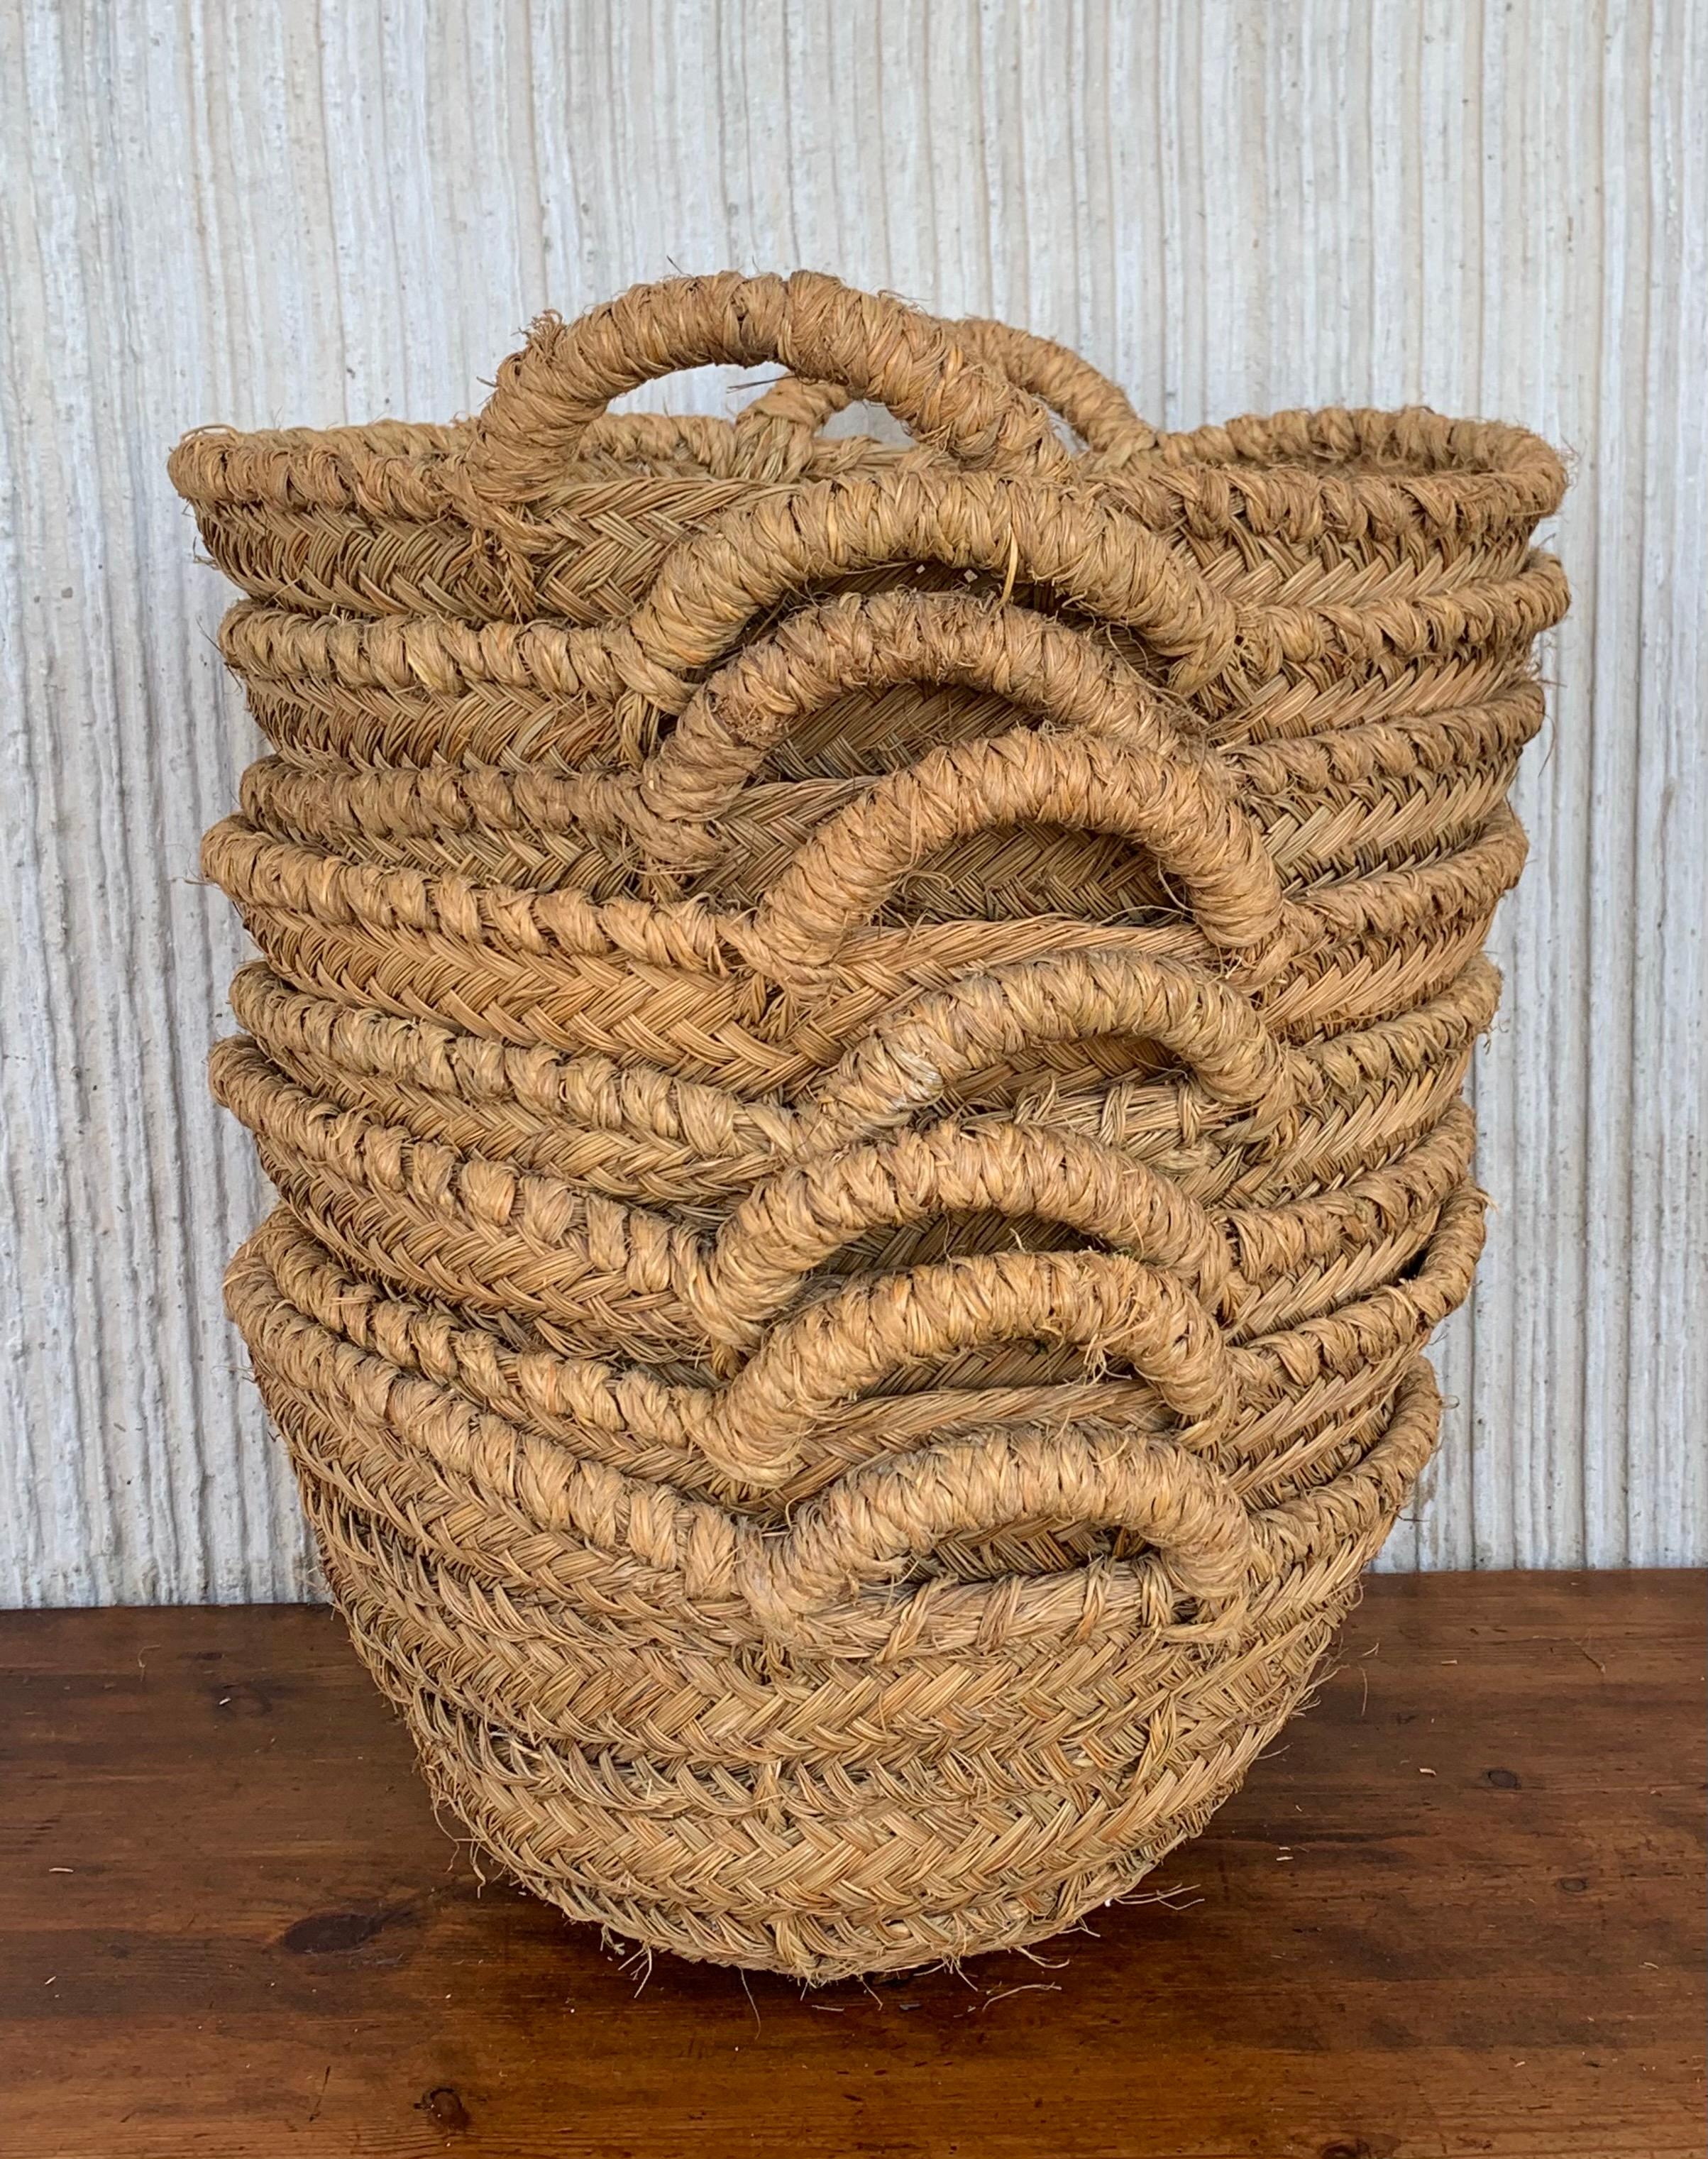 Set of 8 Spanish Woven Wicker Olive Grape Harvest Basket In Good Condition For Sale In Miami, FL